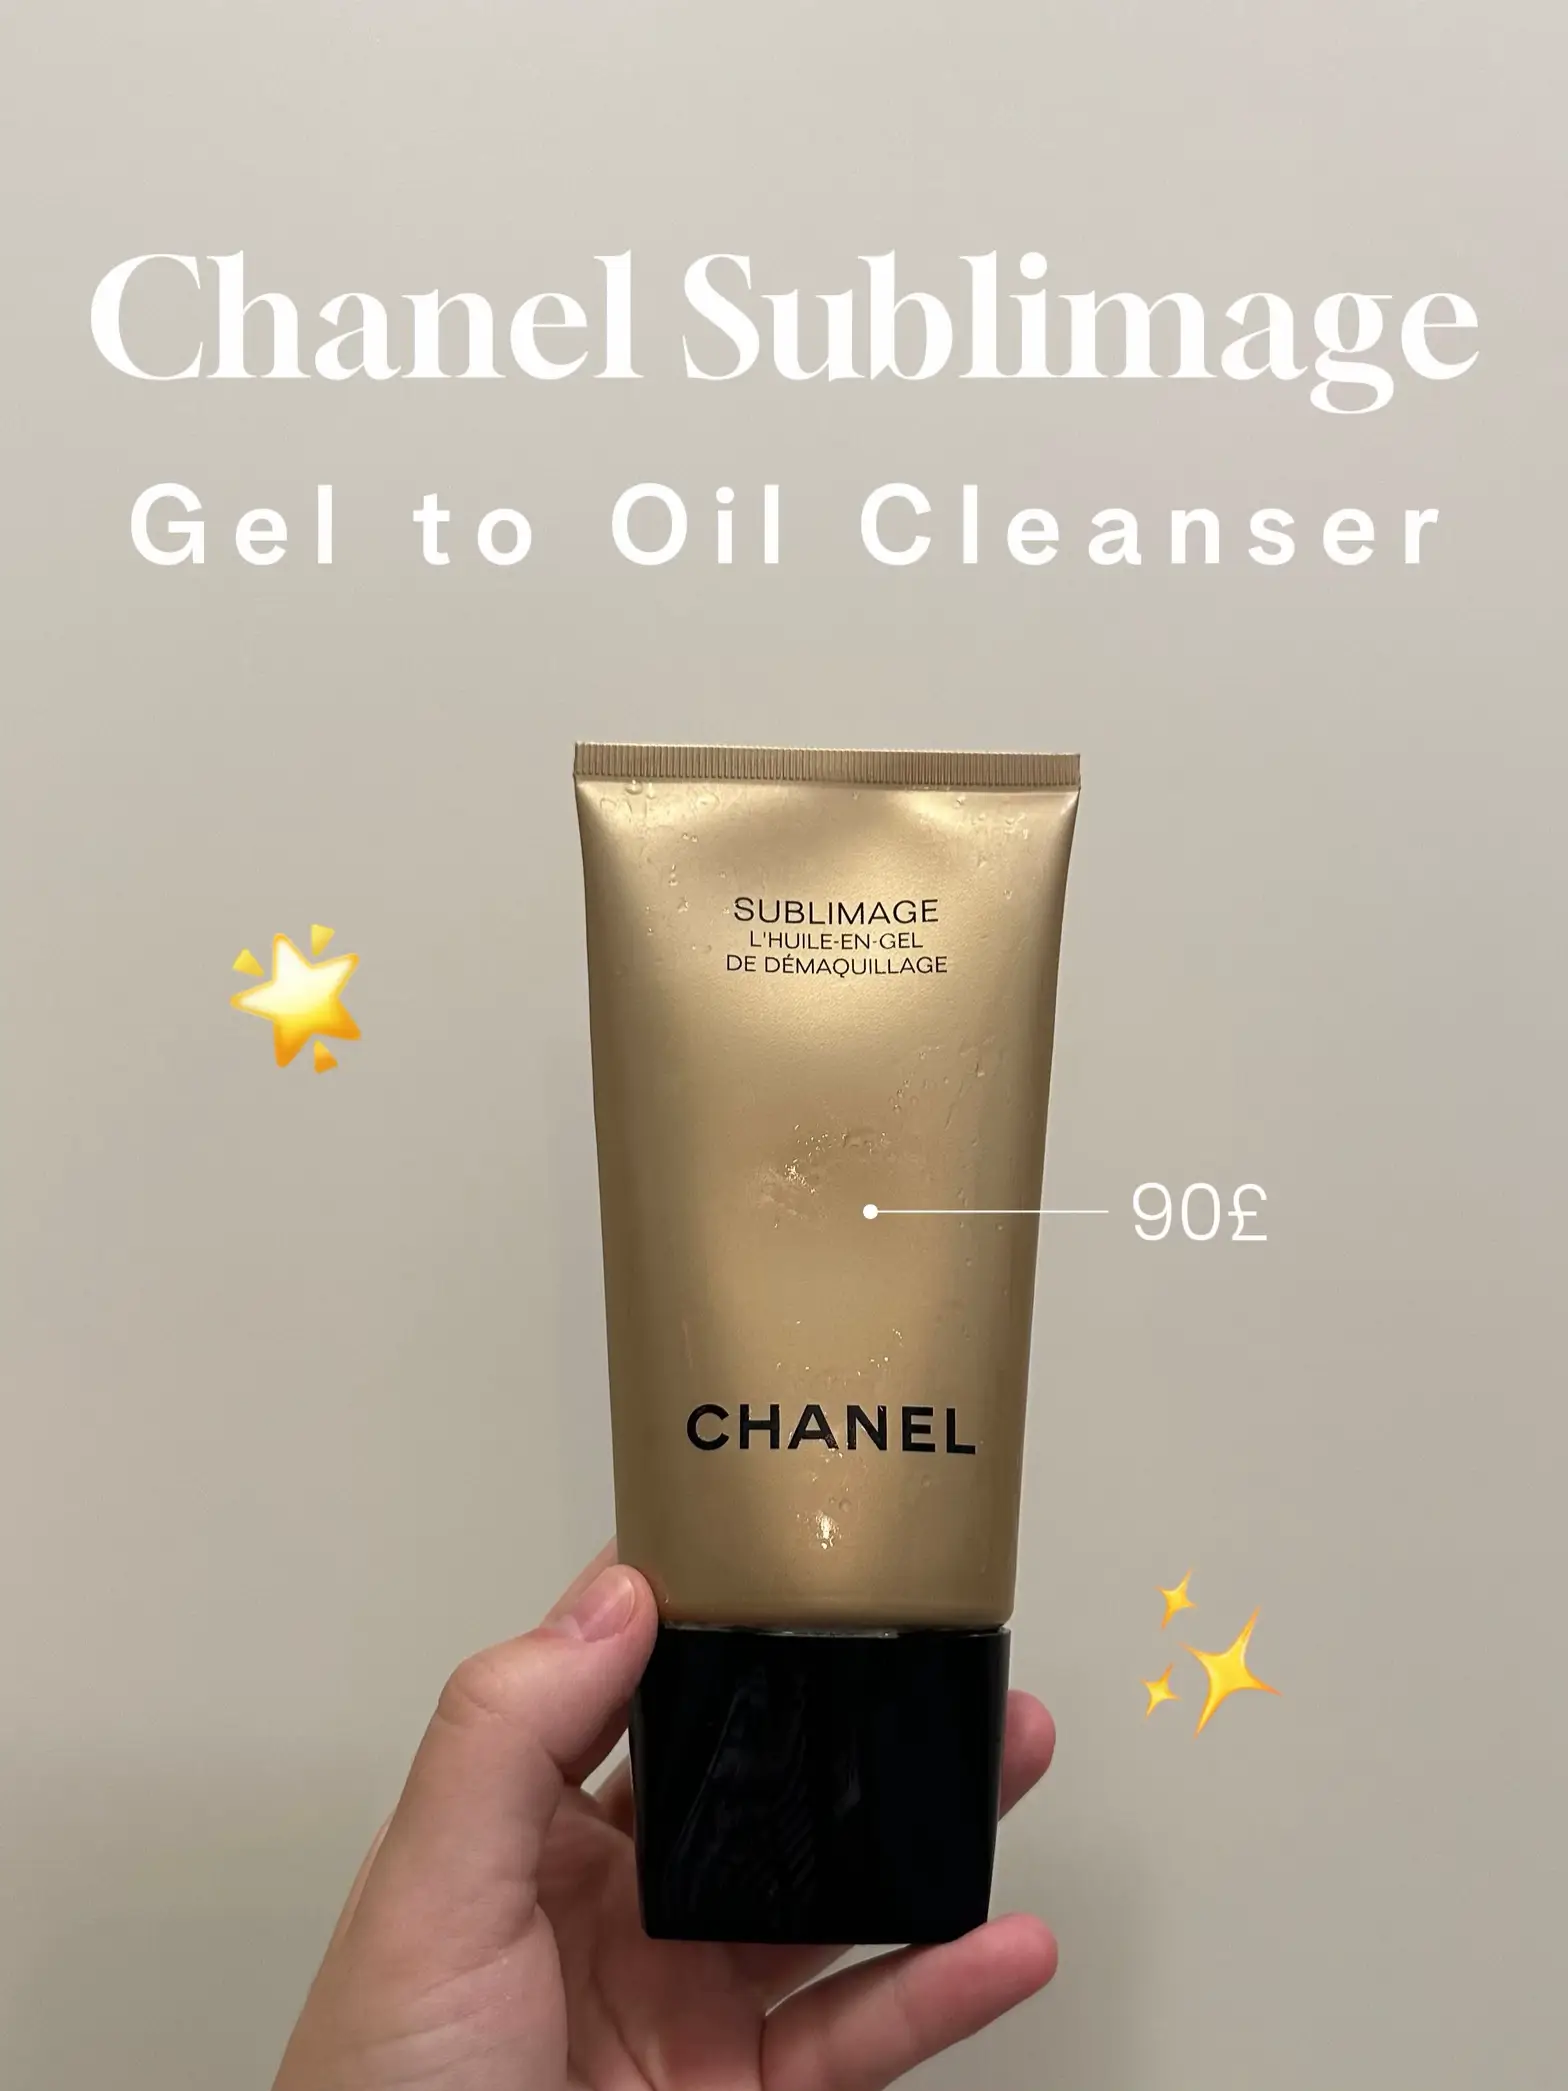 CHANEL Radiance-Revealing Rich Cleansing Soap